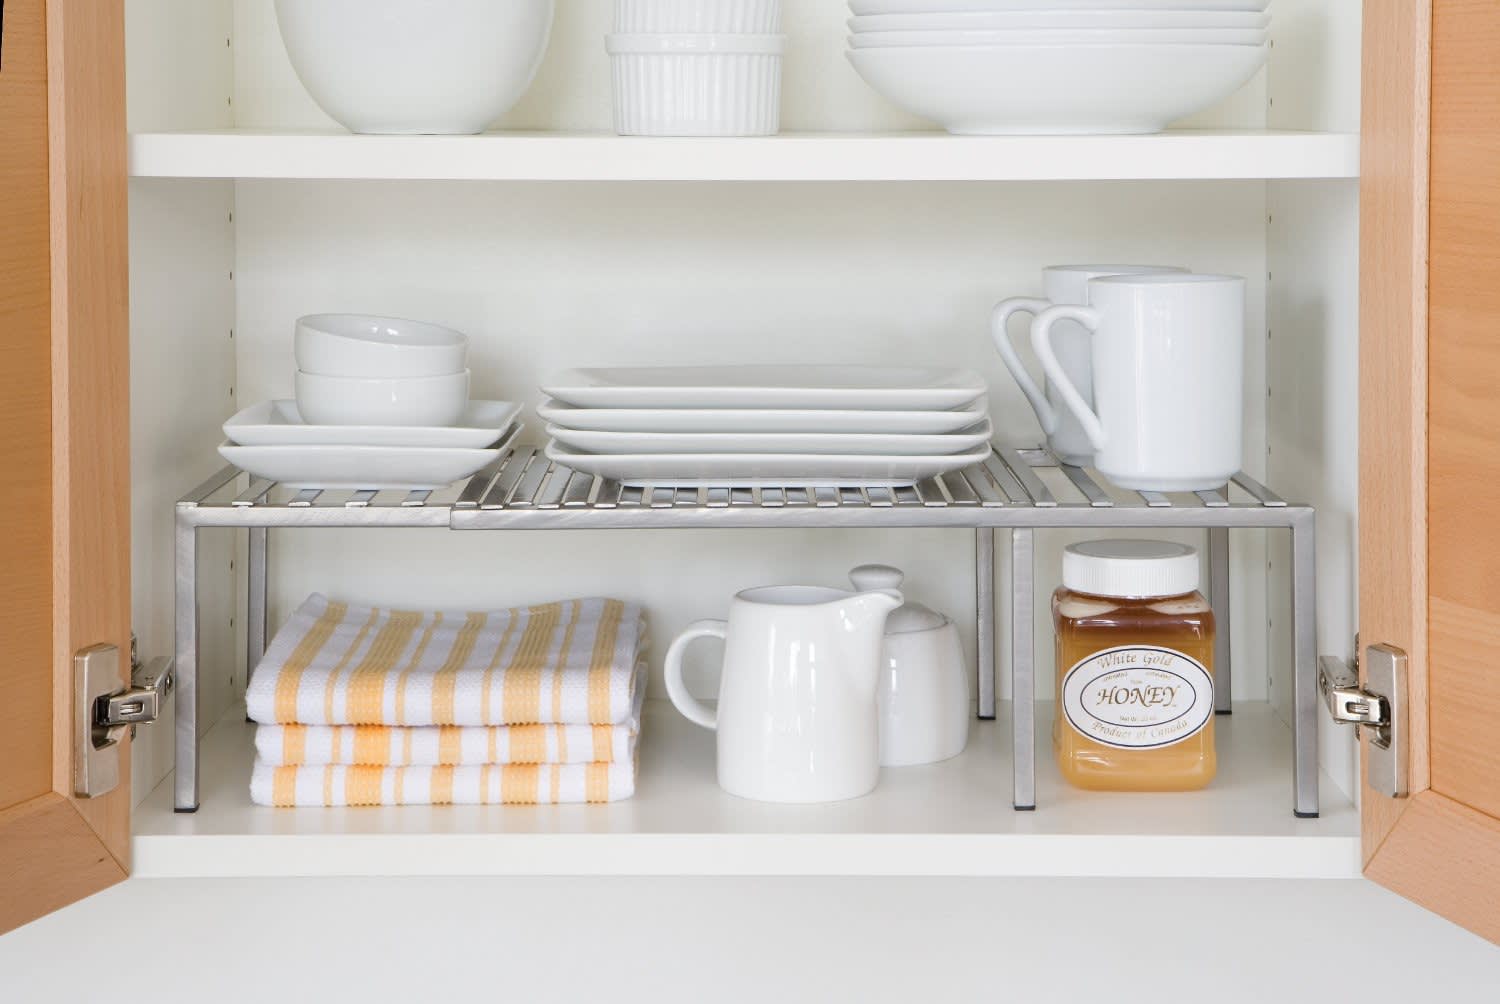 Built-In Storage Cabinet Solutions To Make The Most Of Your Space – Forbes  Home